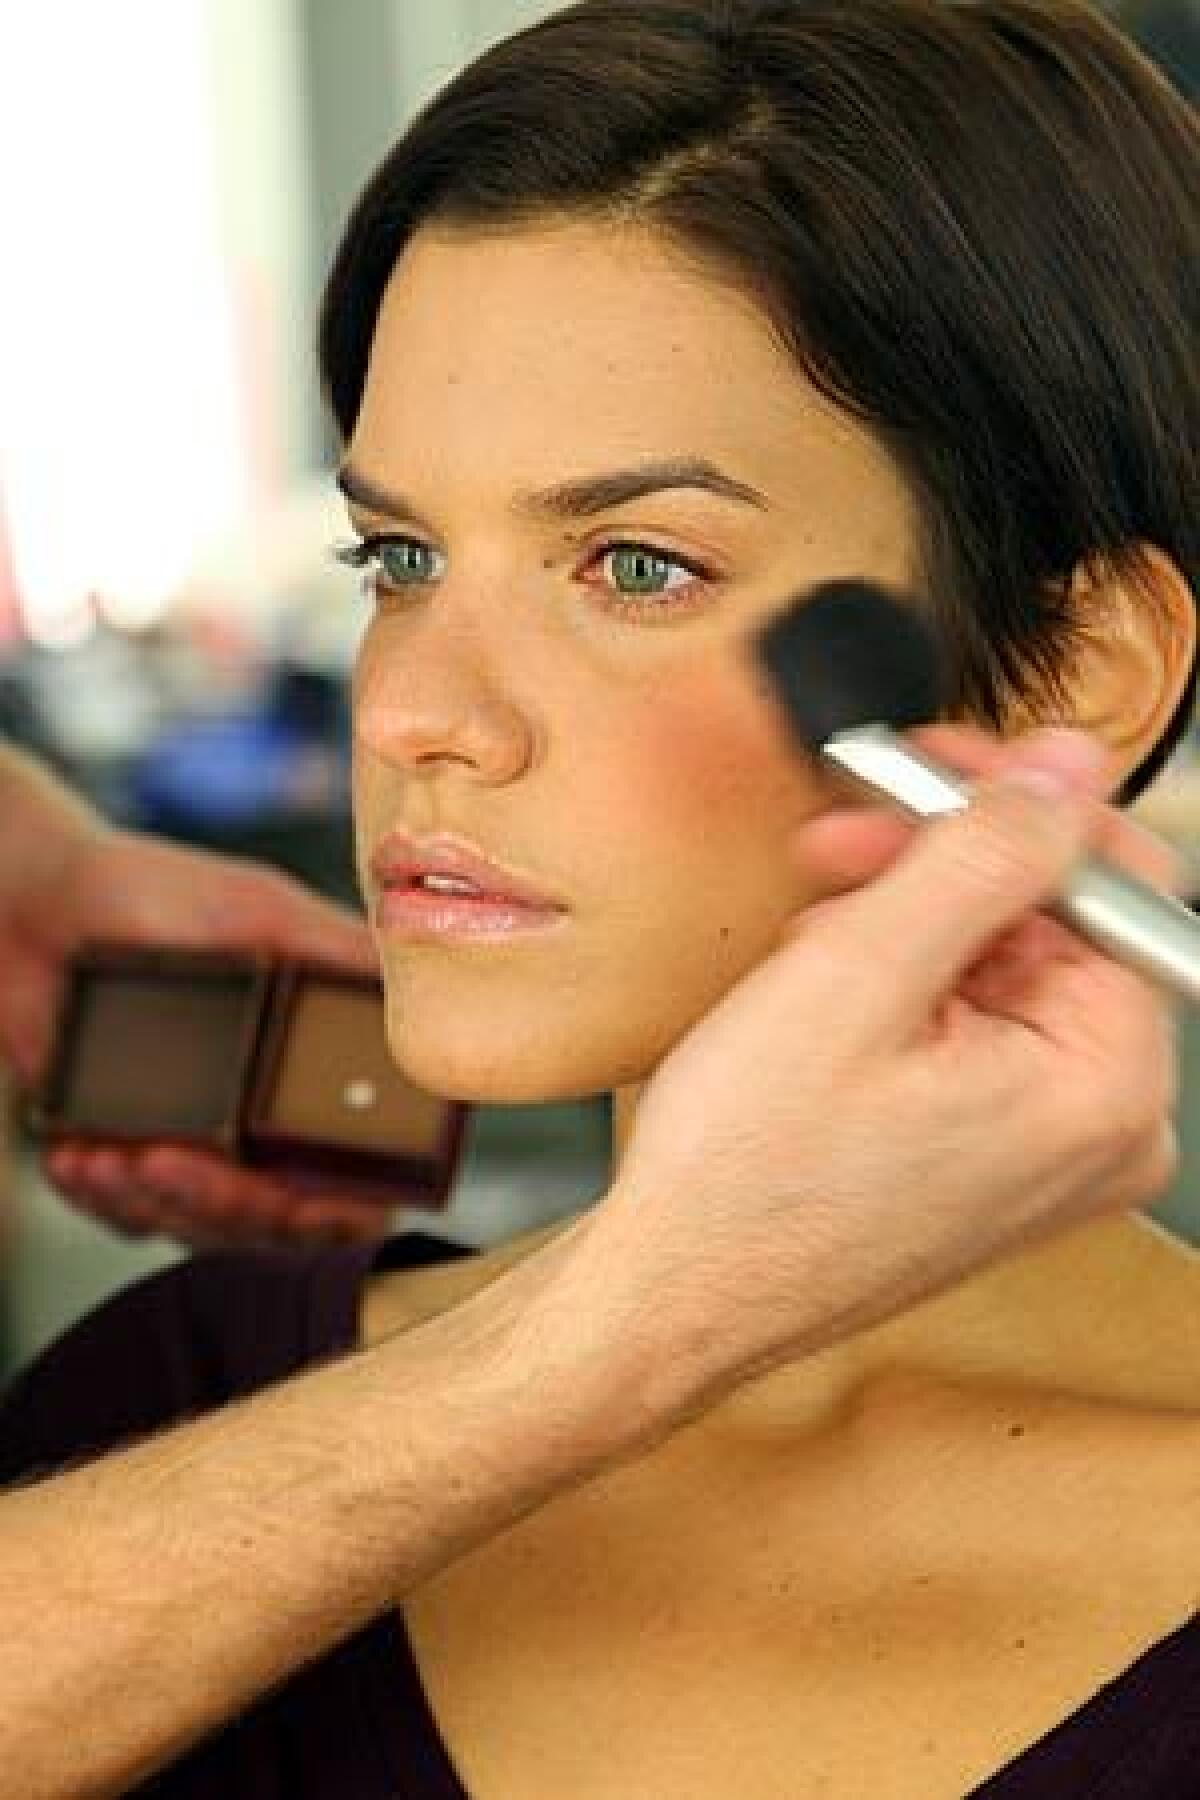 Contouring with bronzer sculpts and adds dimension, but with natural-looking results.